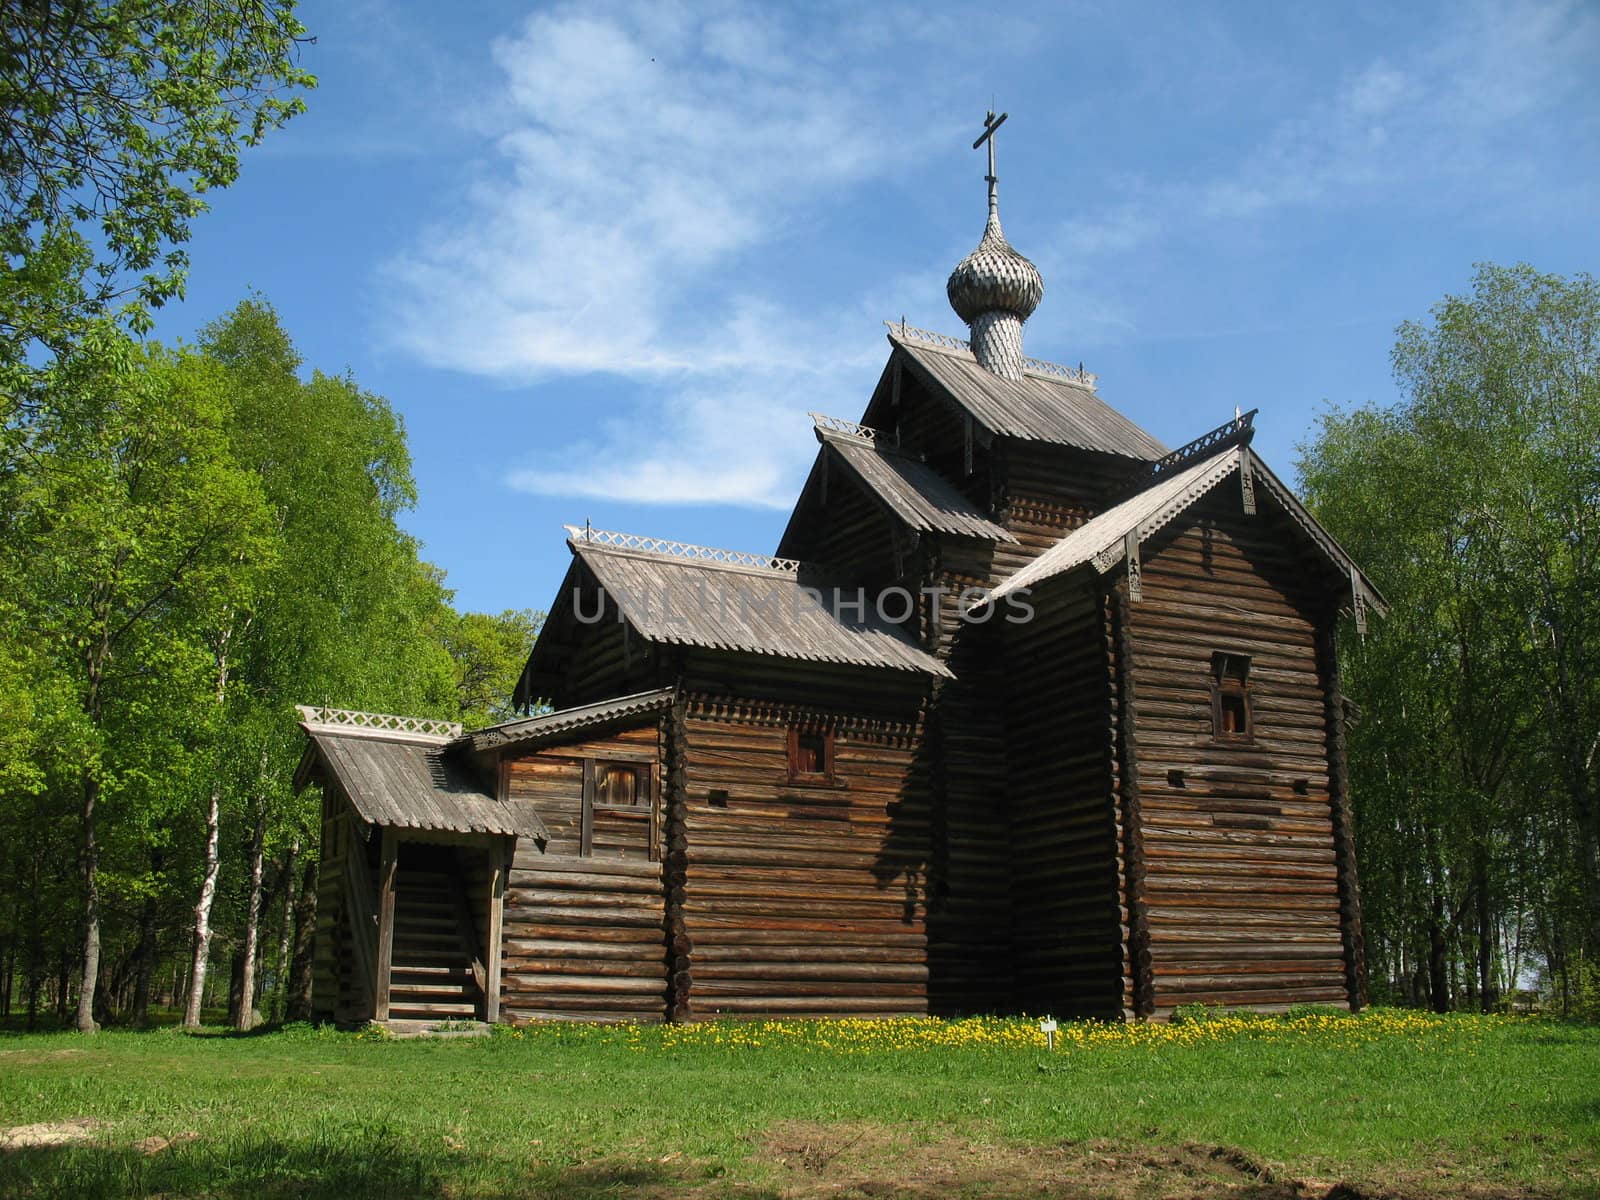 Ancient wooden church in Novgorod Russia